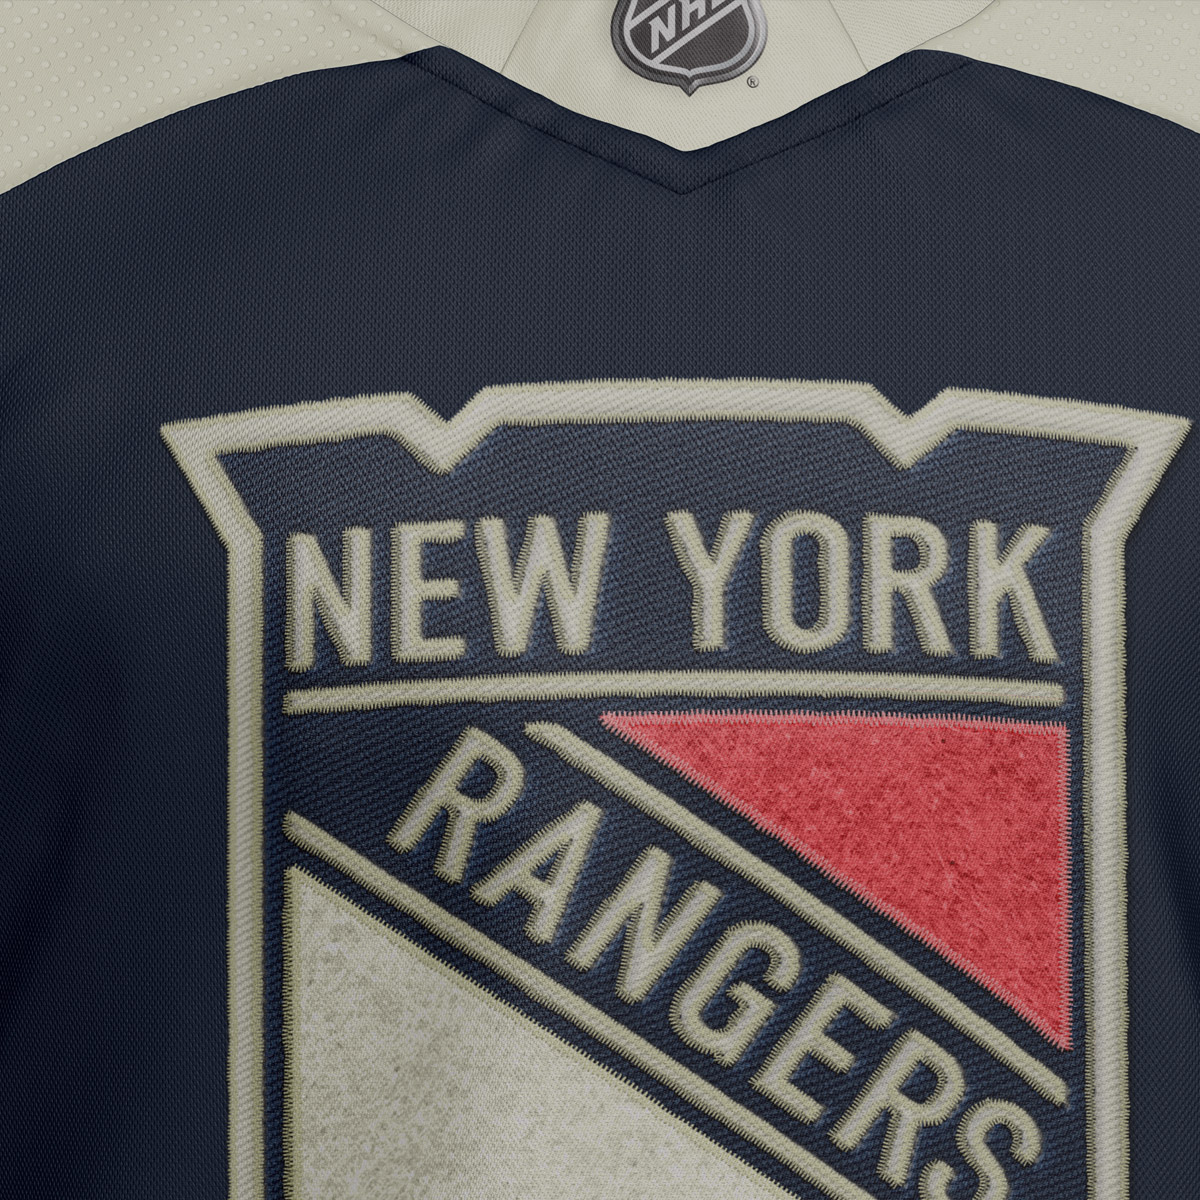 NYR jersey concept side view